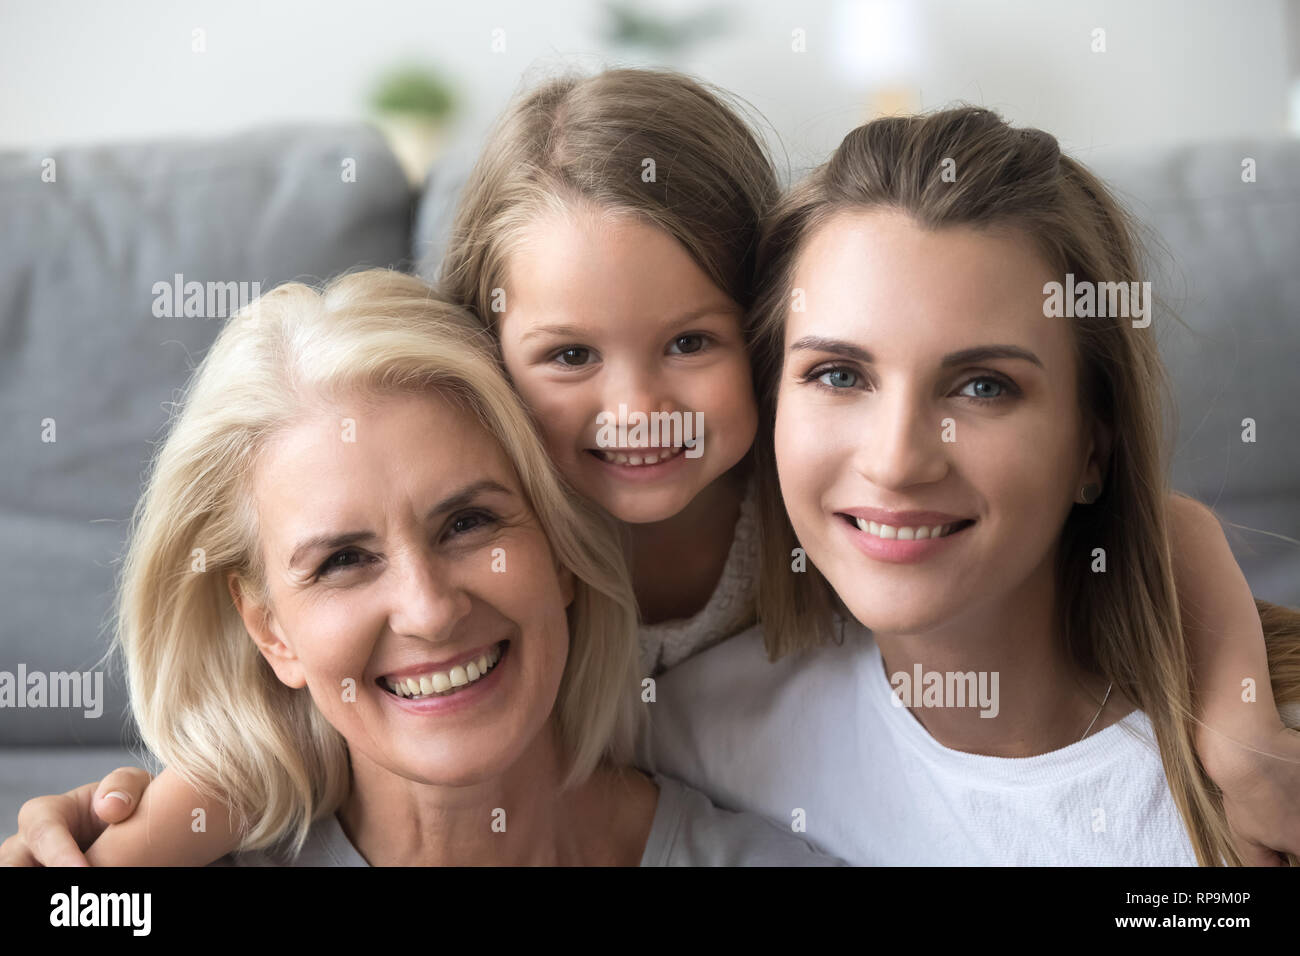 Head shot portrait of smiling grandmother, mother and daughter Stock Photo